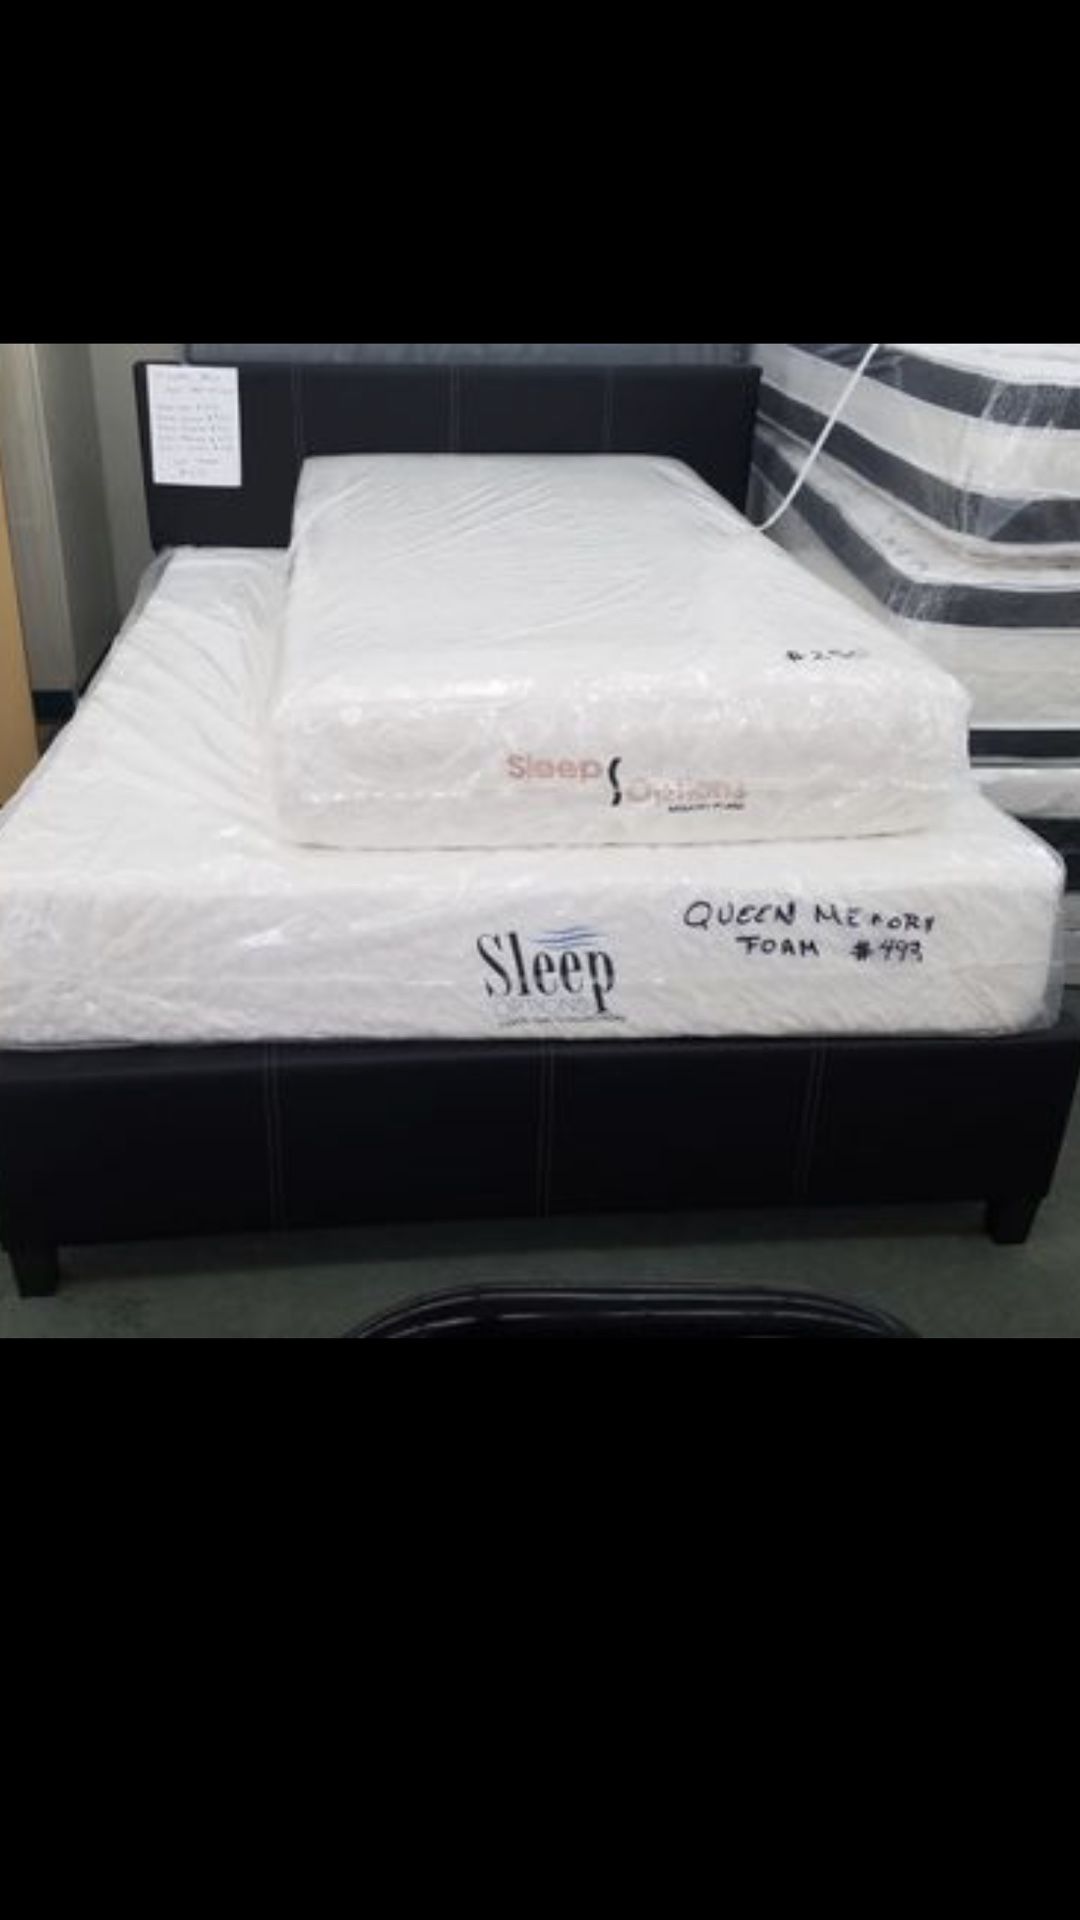 King size Memory Foam Mattress with splits box spring we have all sizes available at Factory Prices and Deliveries available too ( Hablo Español)